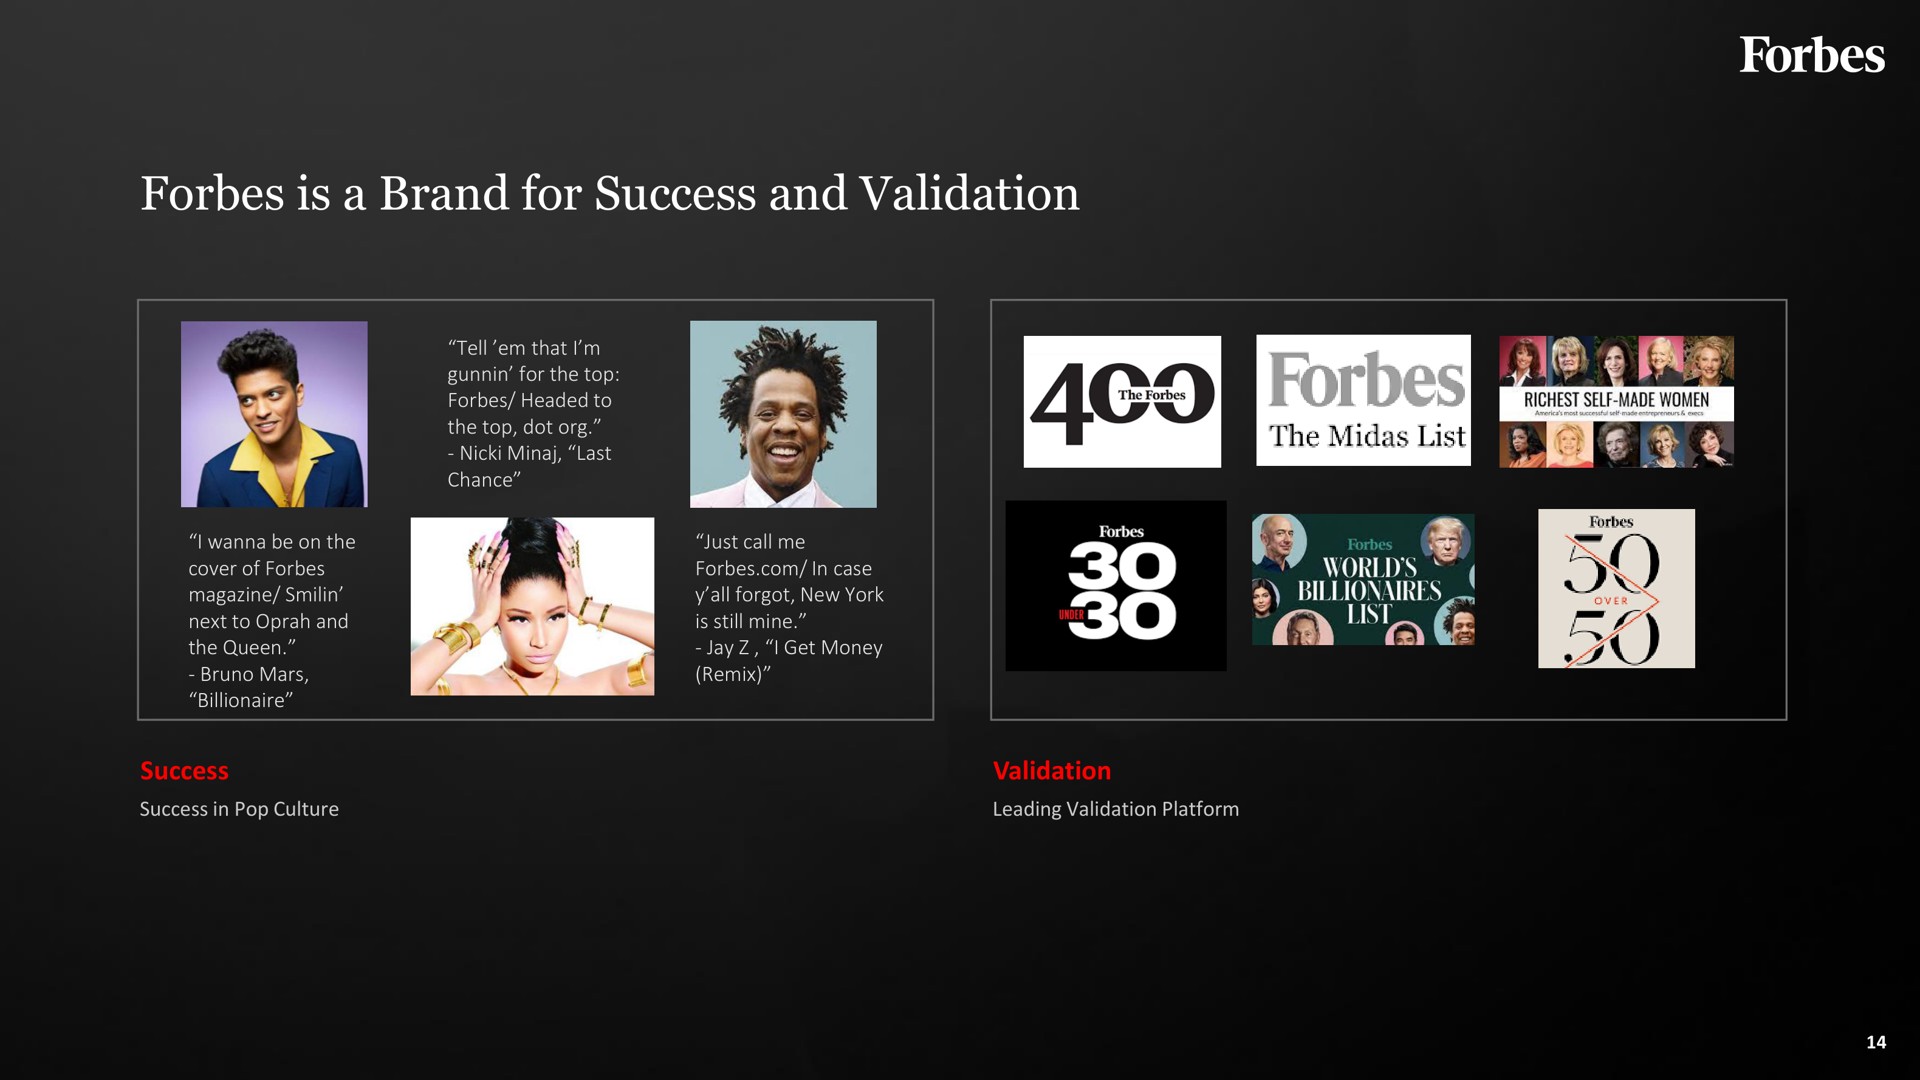 is a brand for success and validation | Forbes